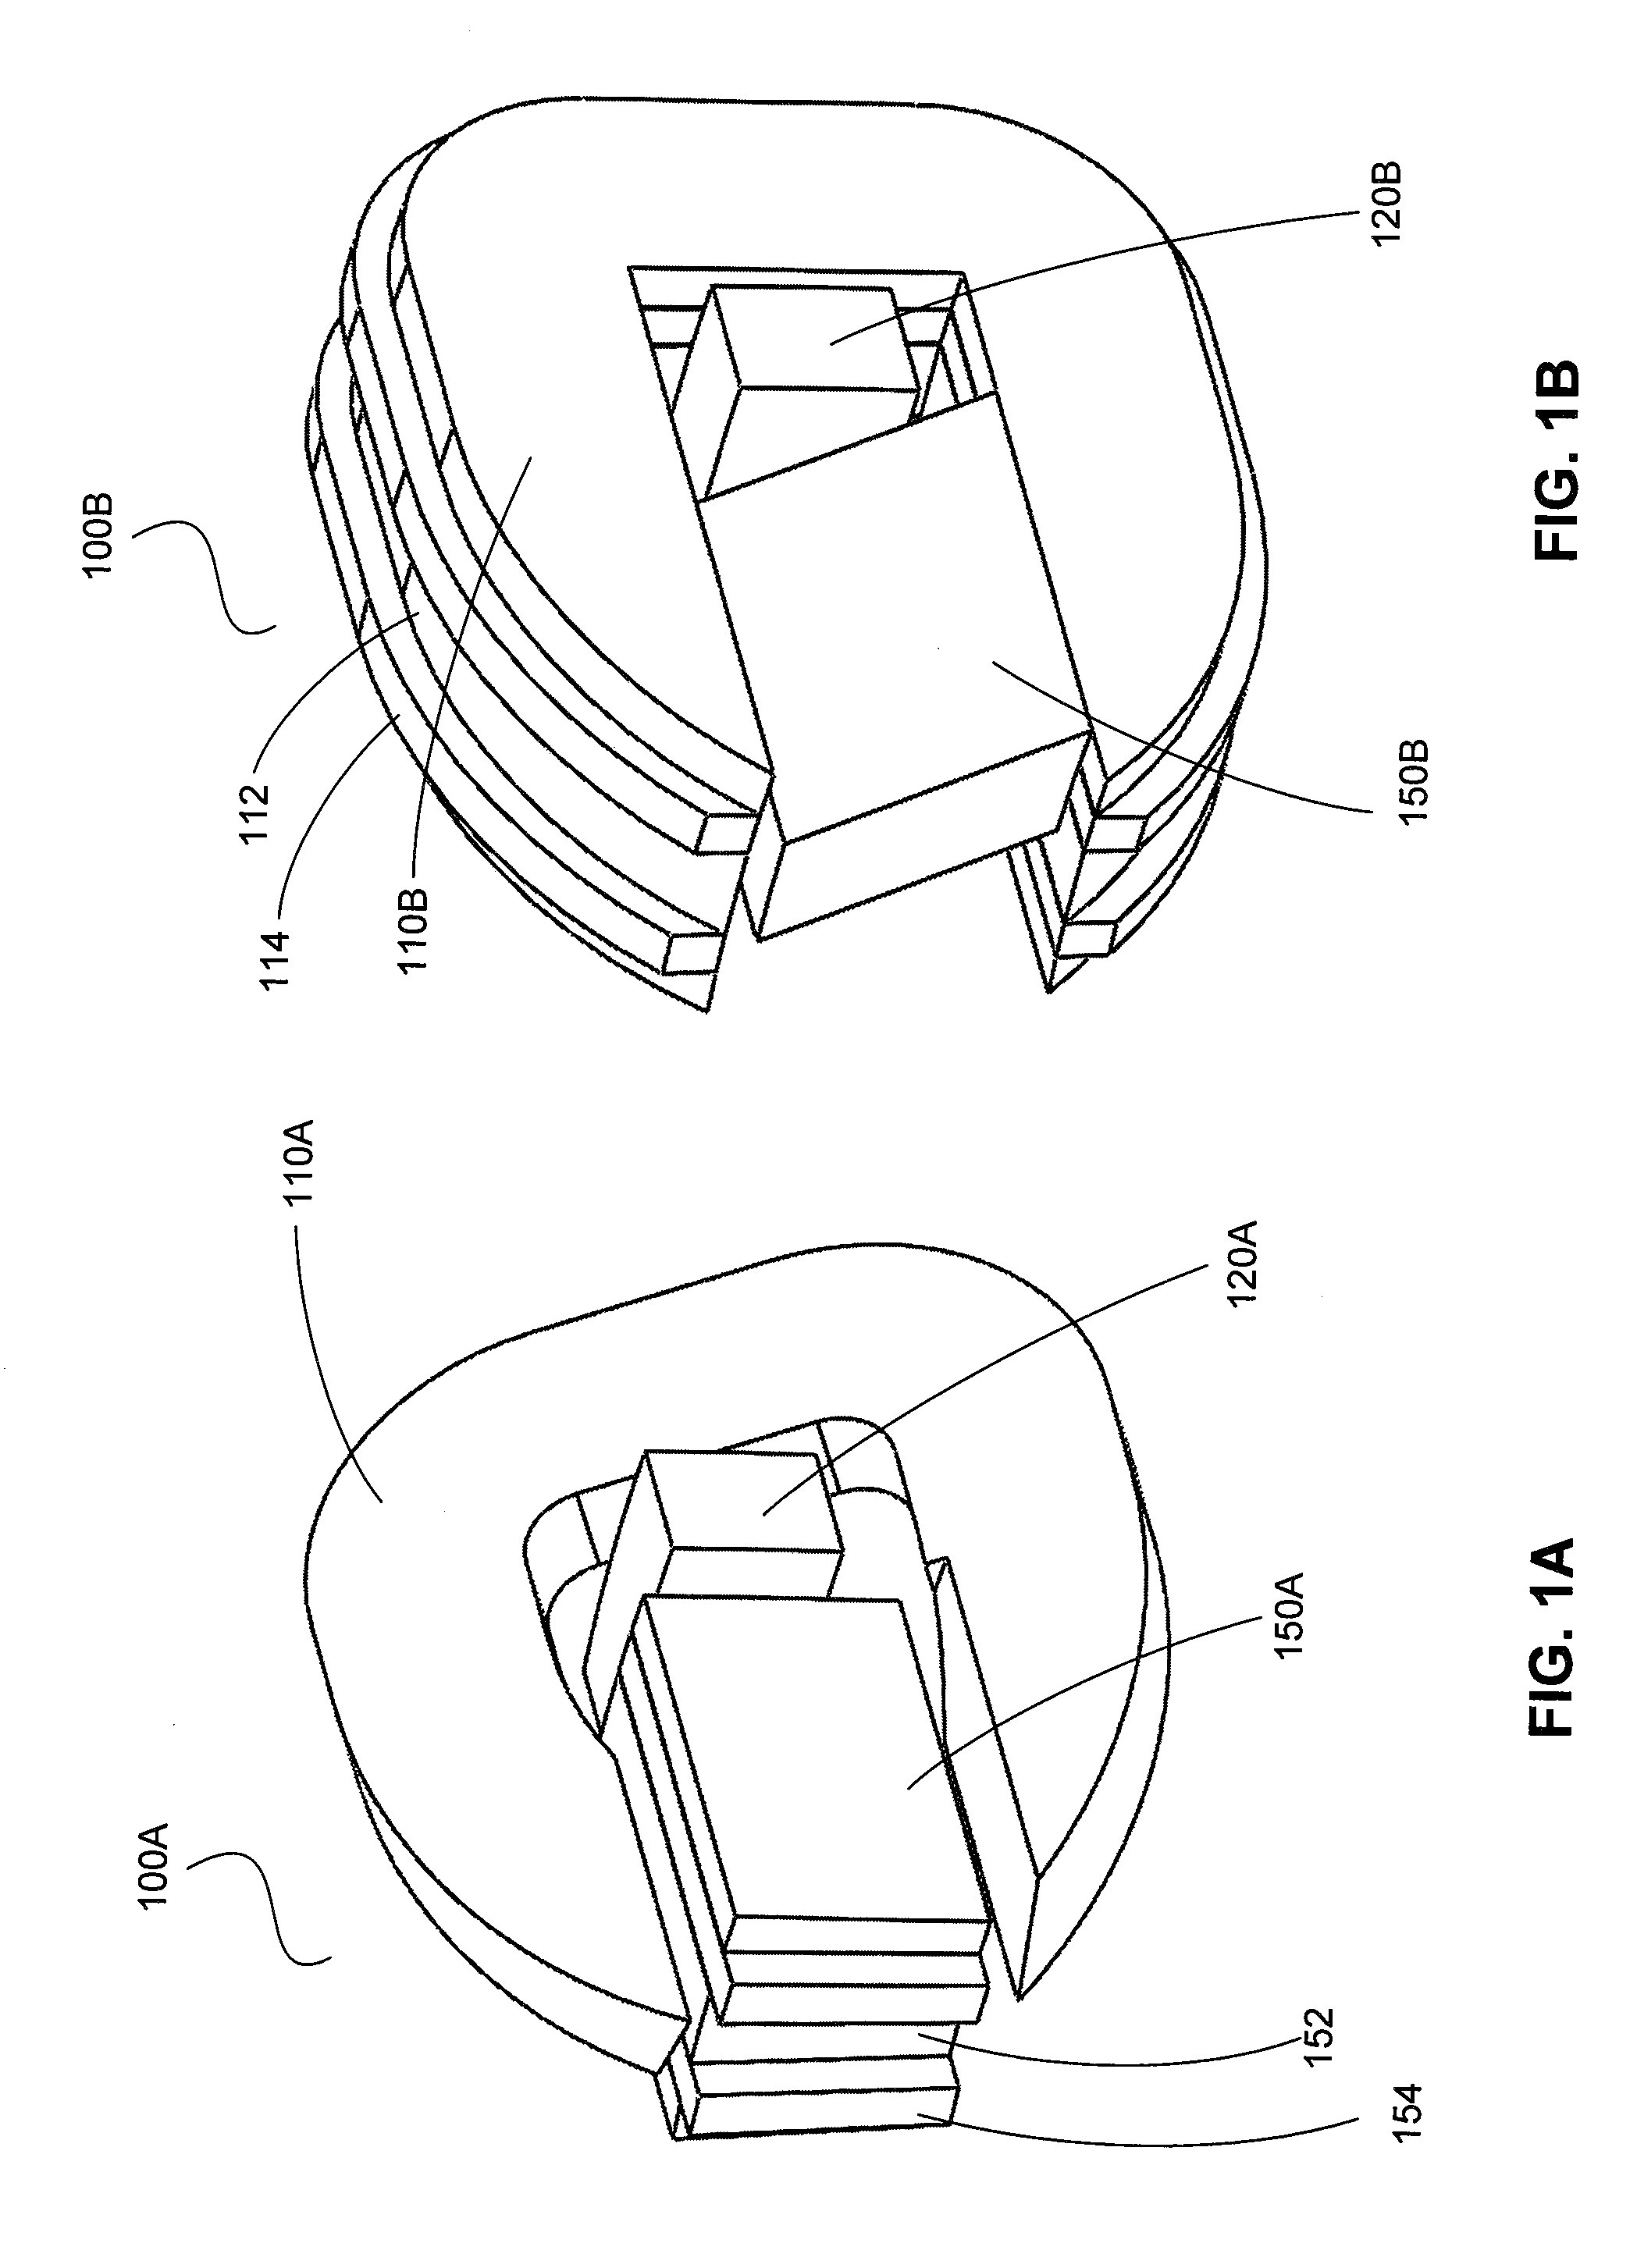 Transverse and/or commutated FLUX systems having multidirectional laminations